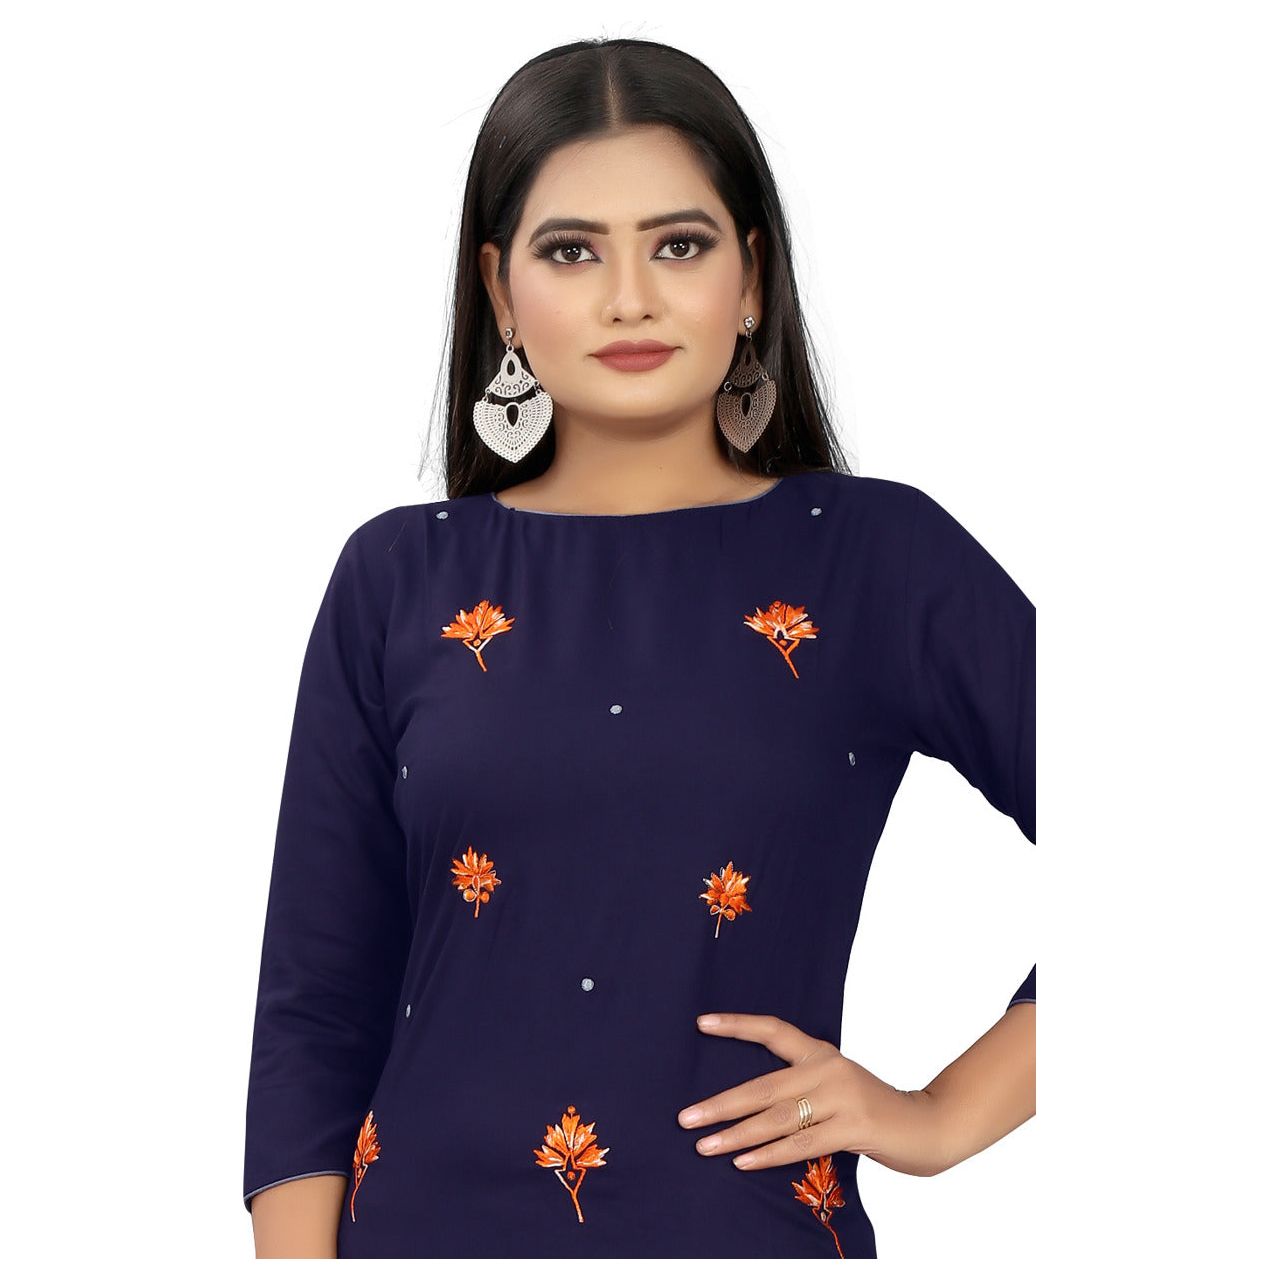 Indigo A line IndianTunic Top Kurta for women with All over Orange Floral Embroidery